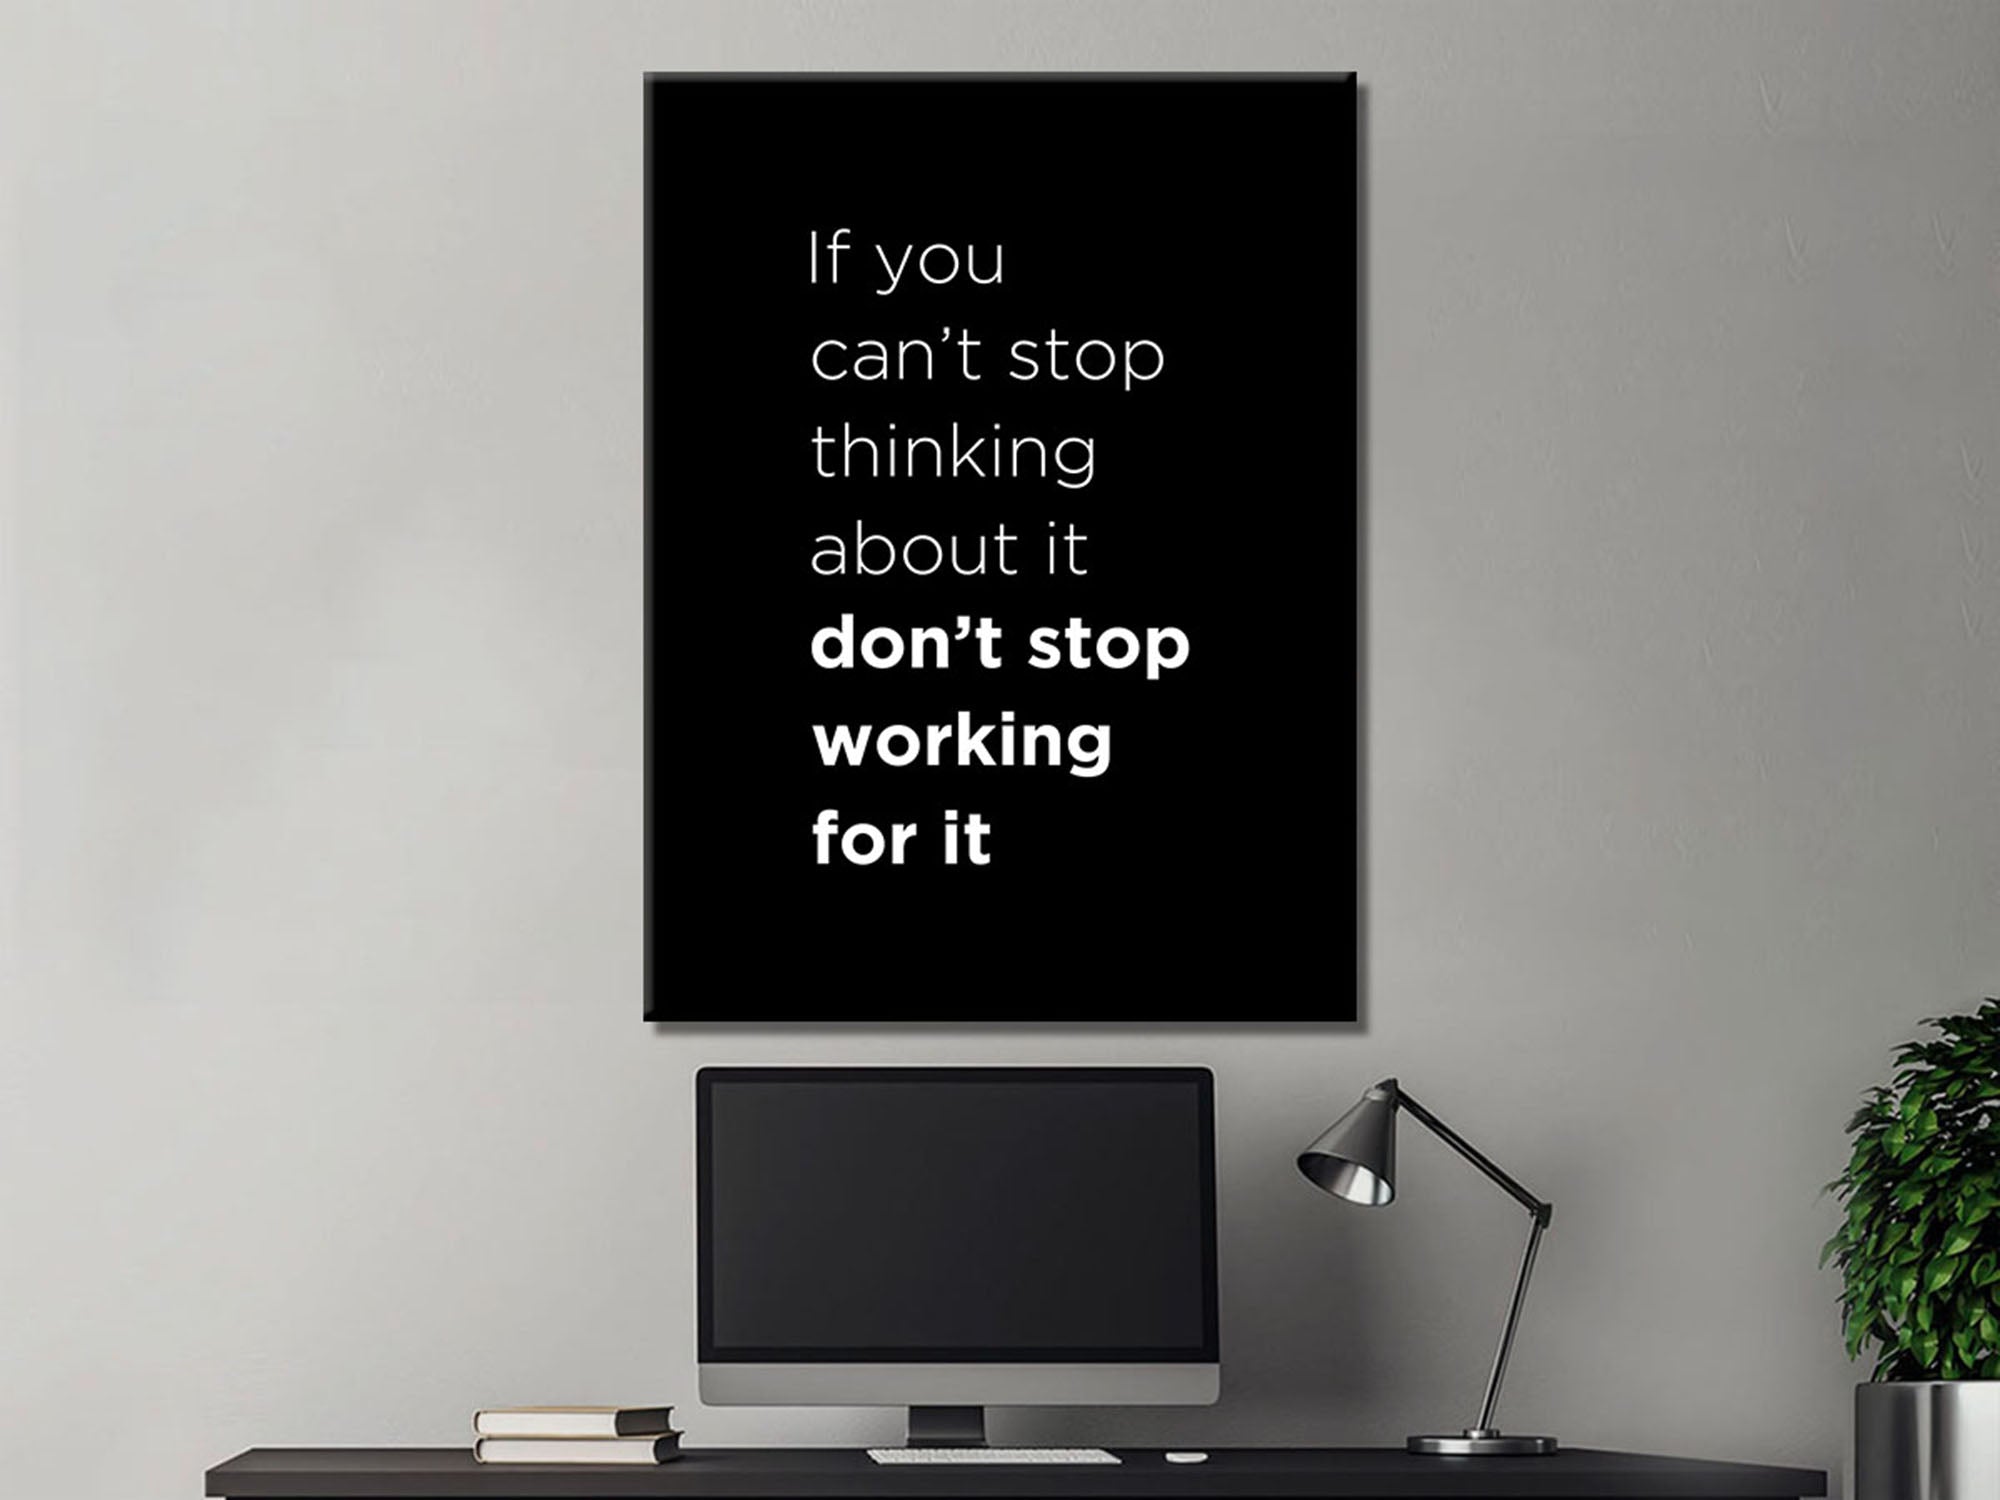 Don't Stop Working For It